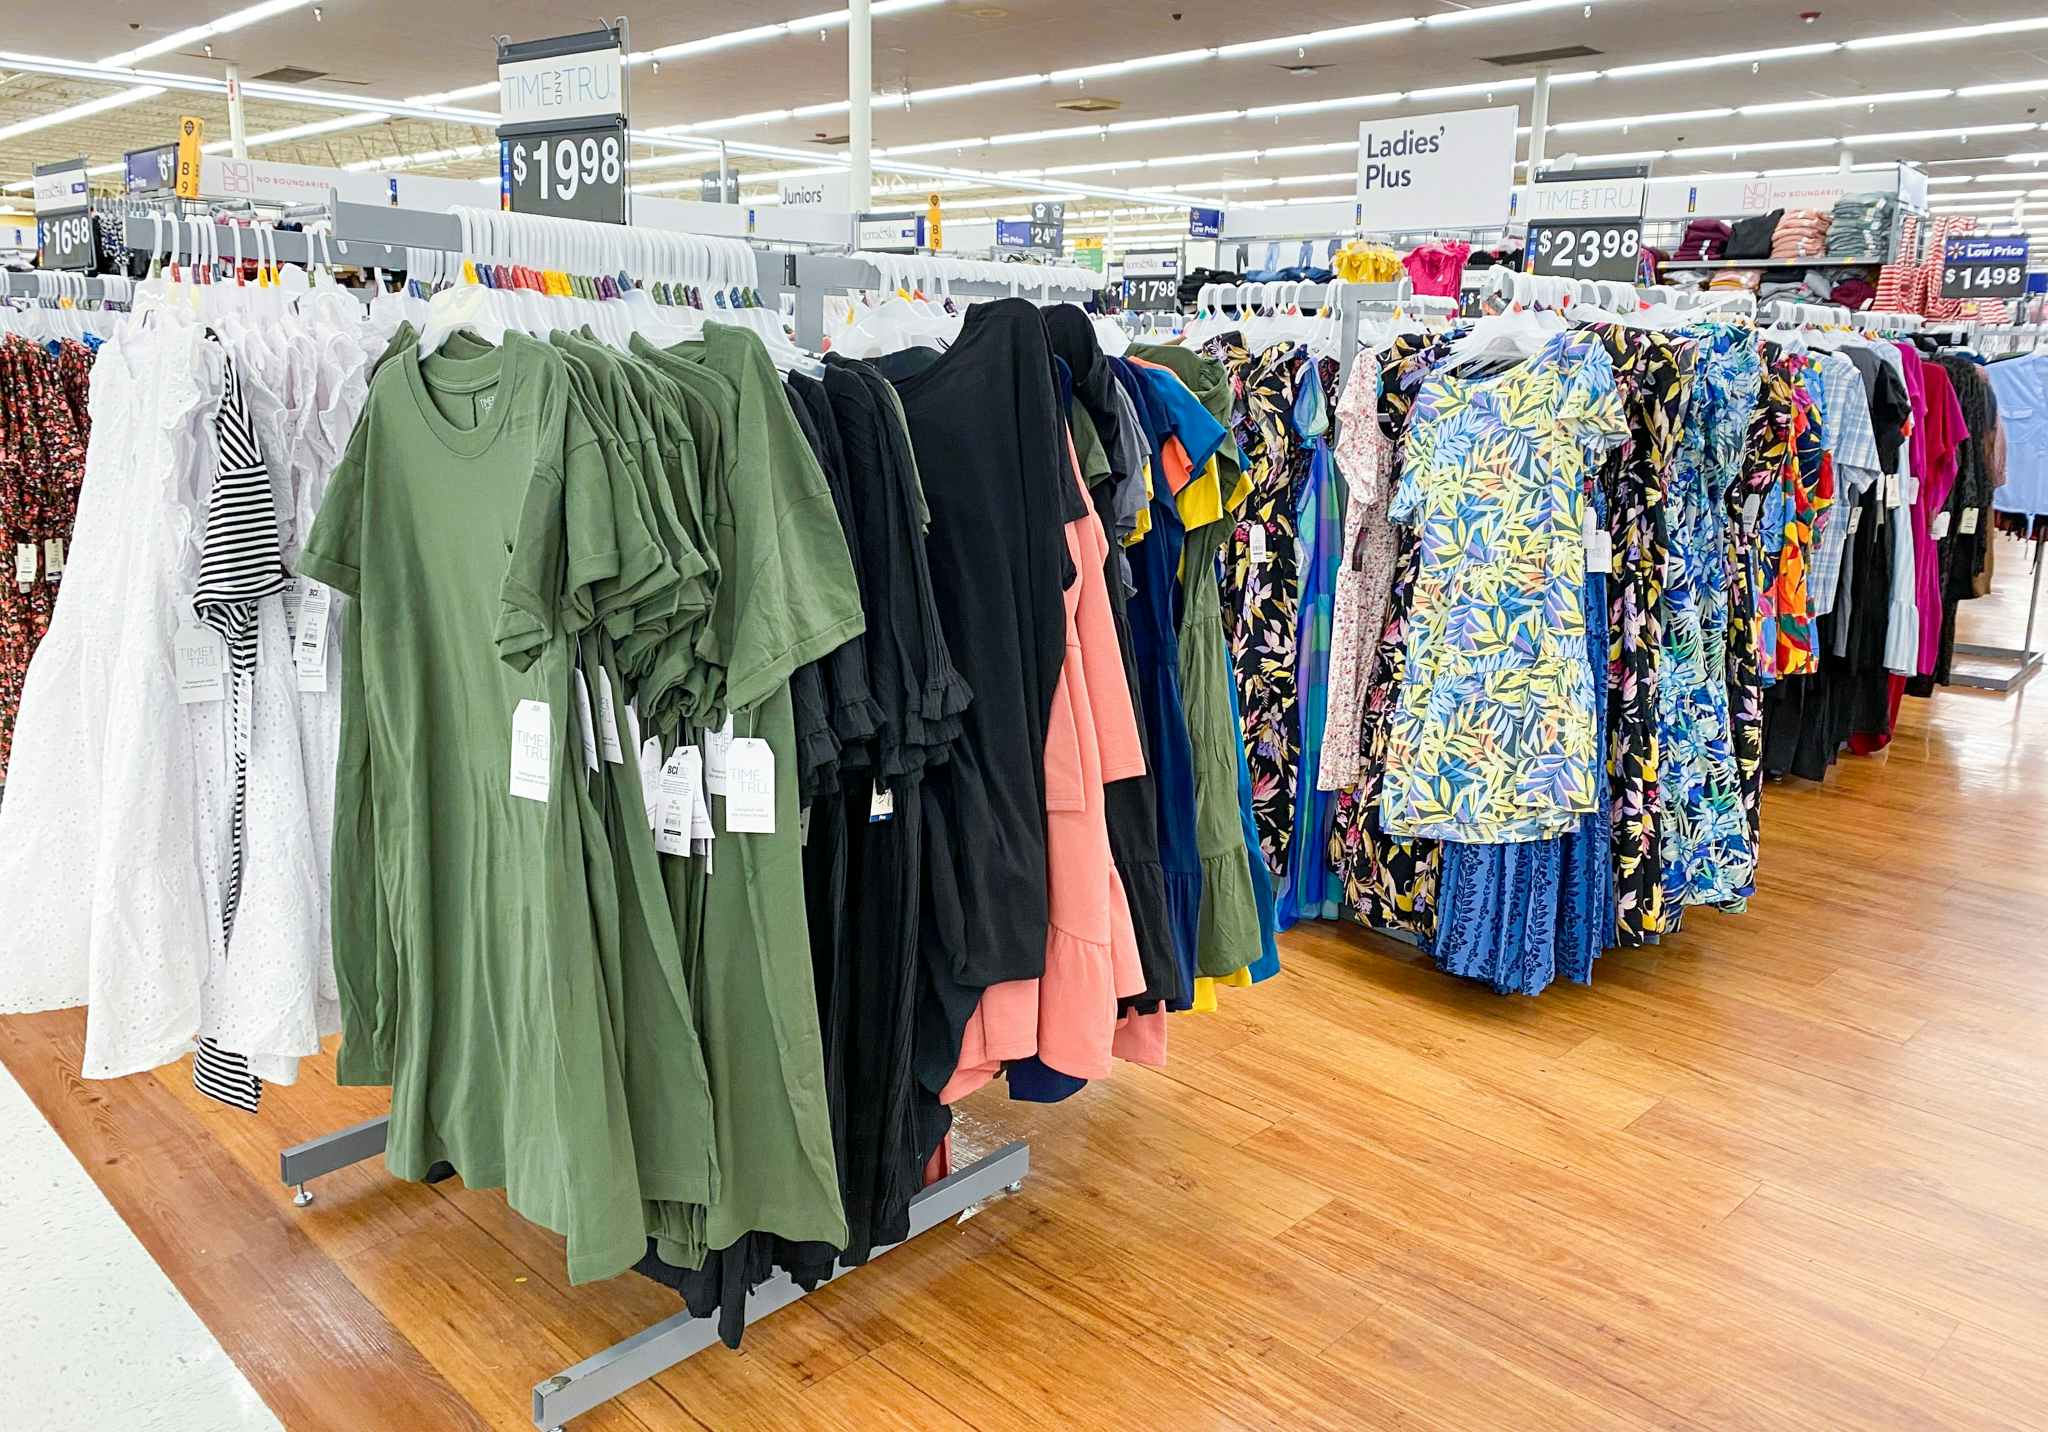 Dress Clearance at Walmart for $10 and Less (Plus Sizes Included)